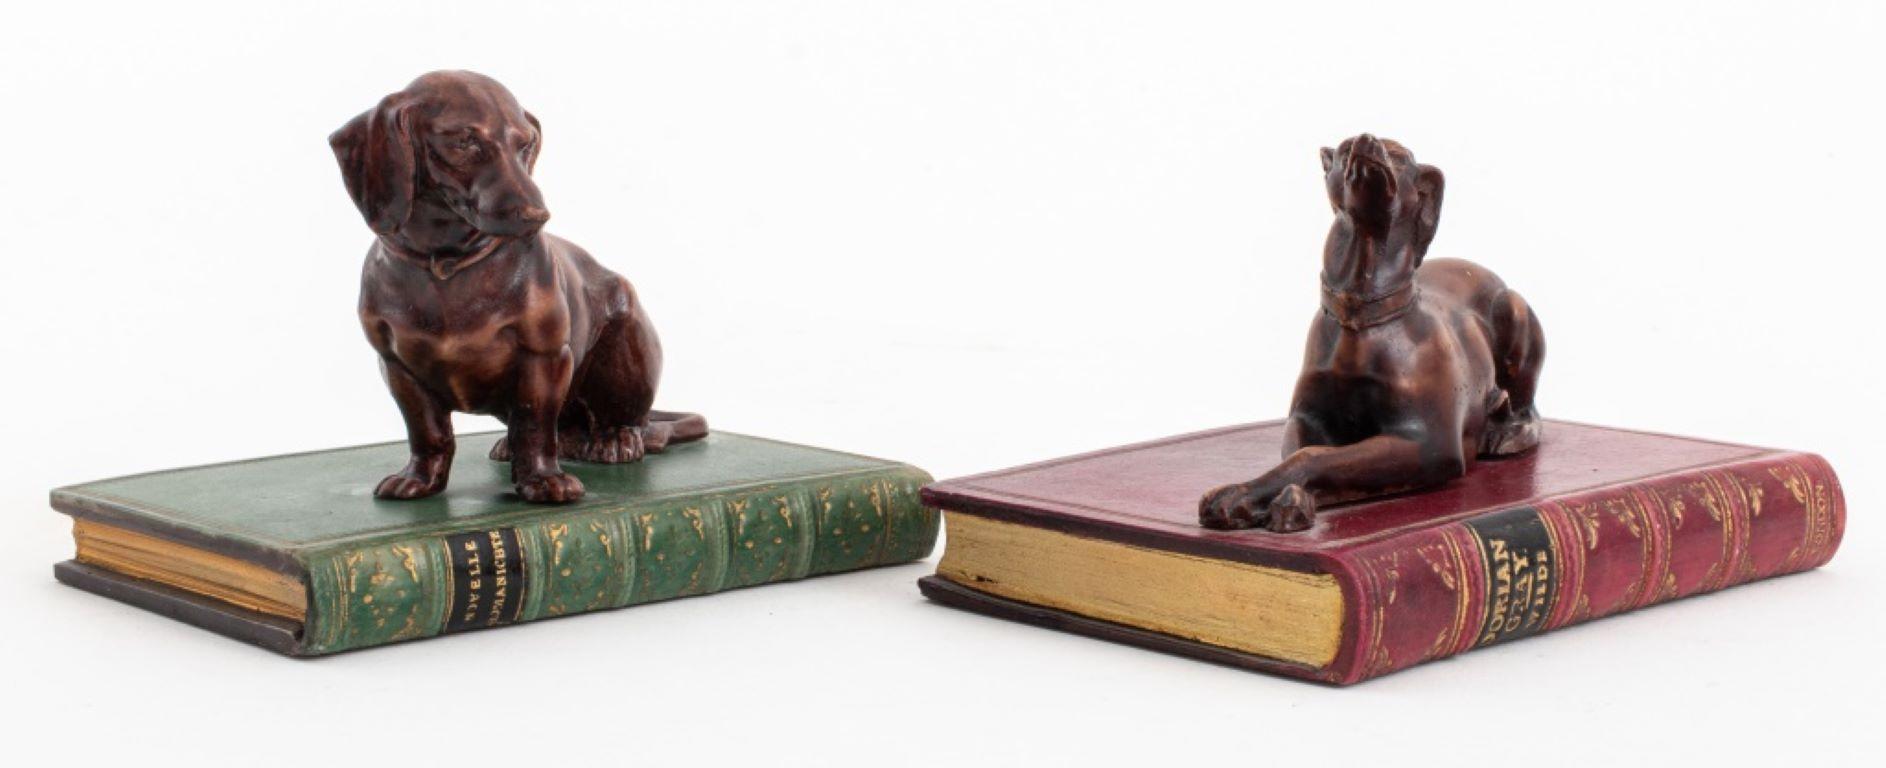 British Leather Bounded Books With Dog Paperweight, 2